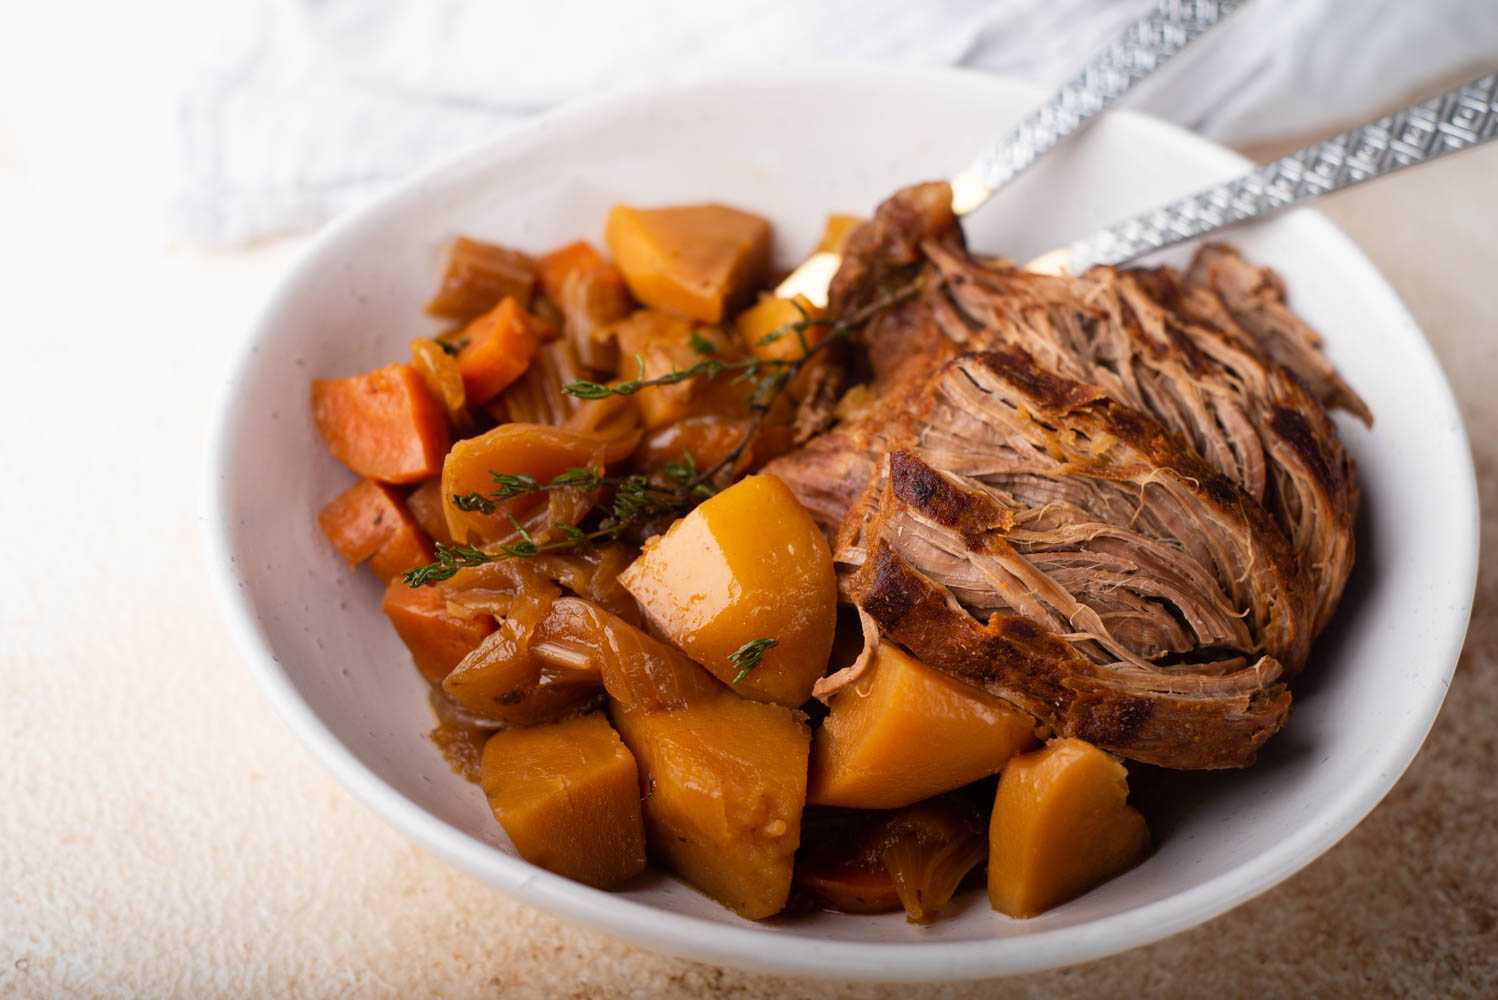 Venison roast with roasted potatoes, carrots, onions, thyme and spices in white bowl